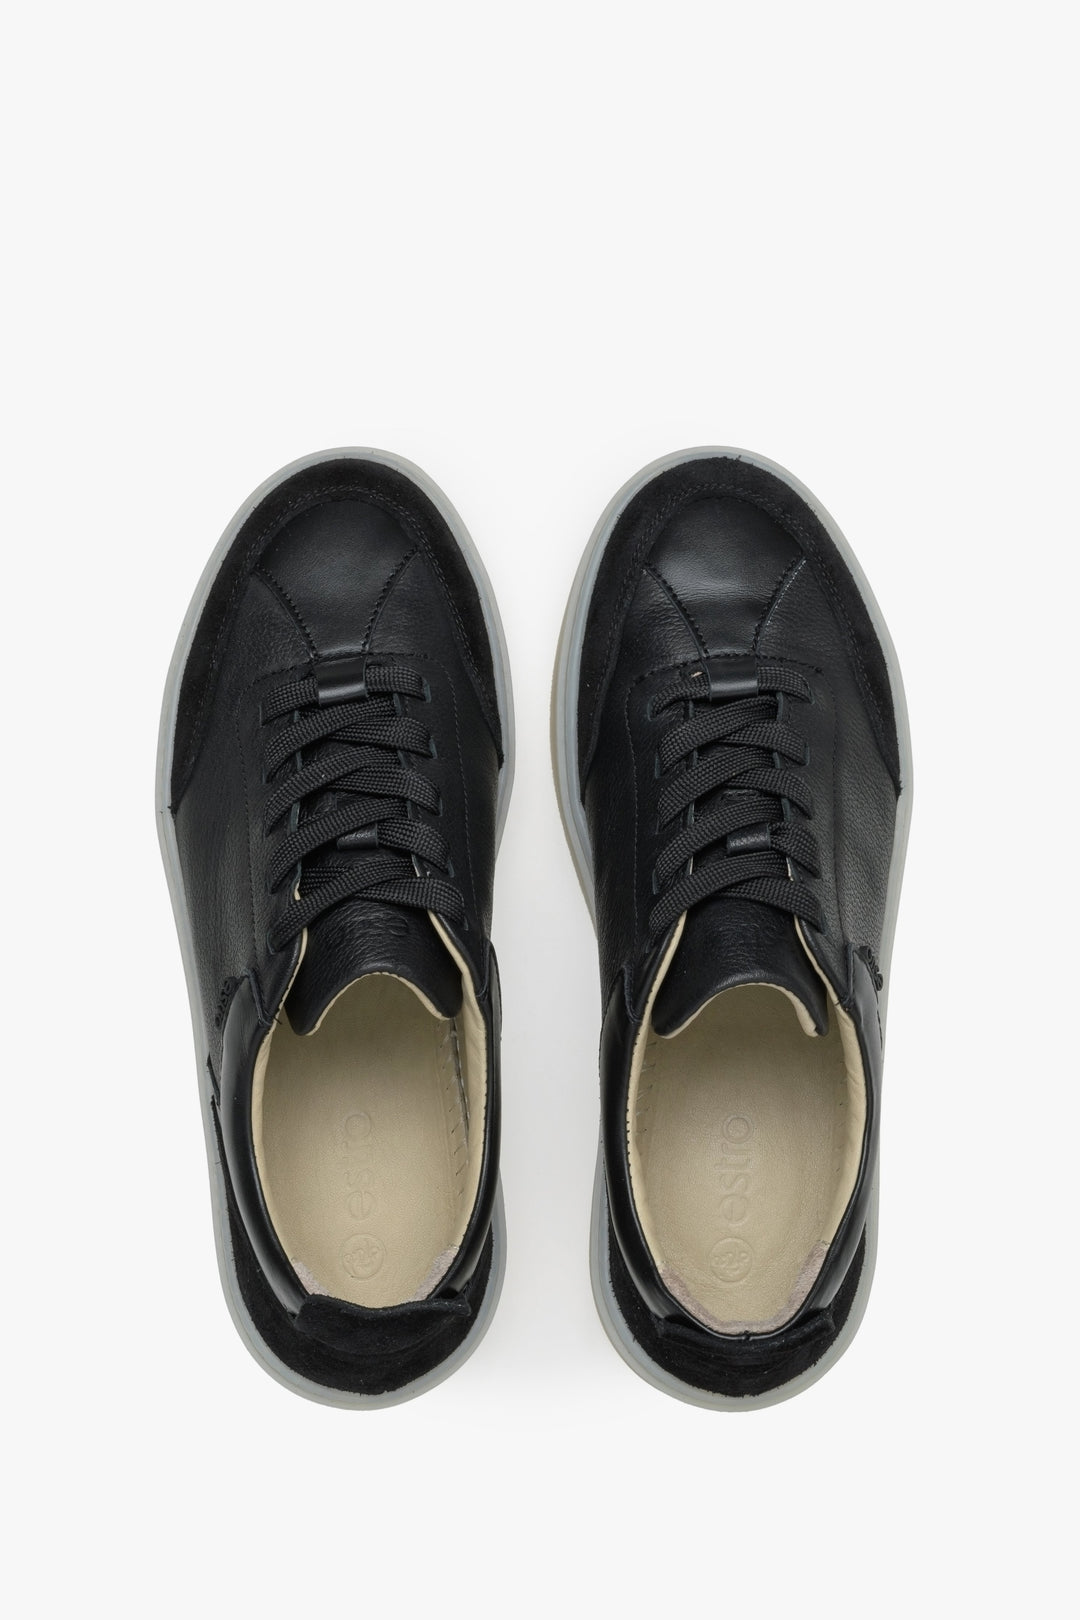 Estro women's sneakers in black with leather and velour - top view presentation.